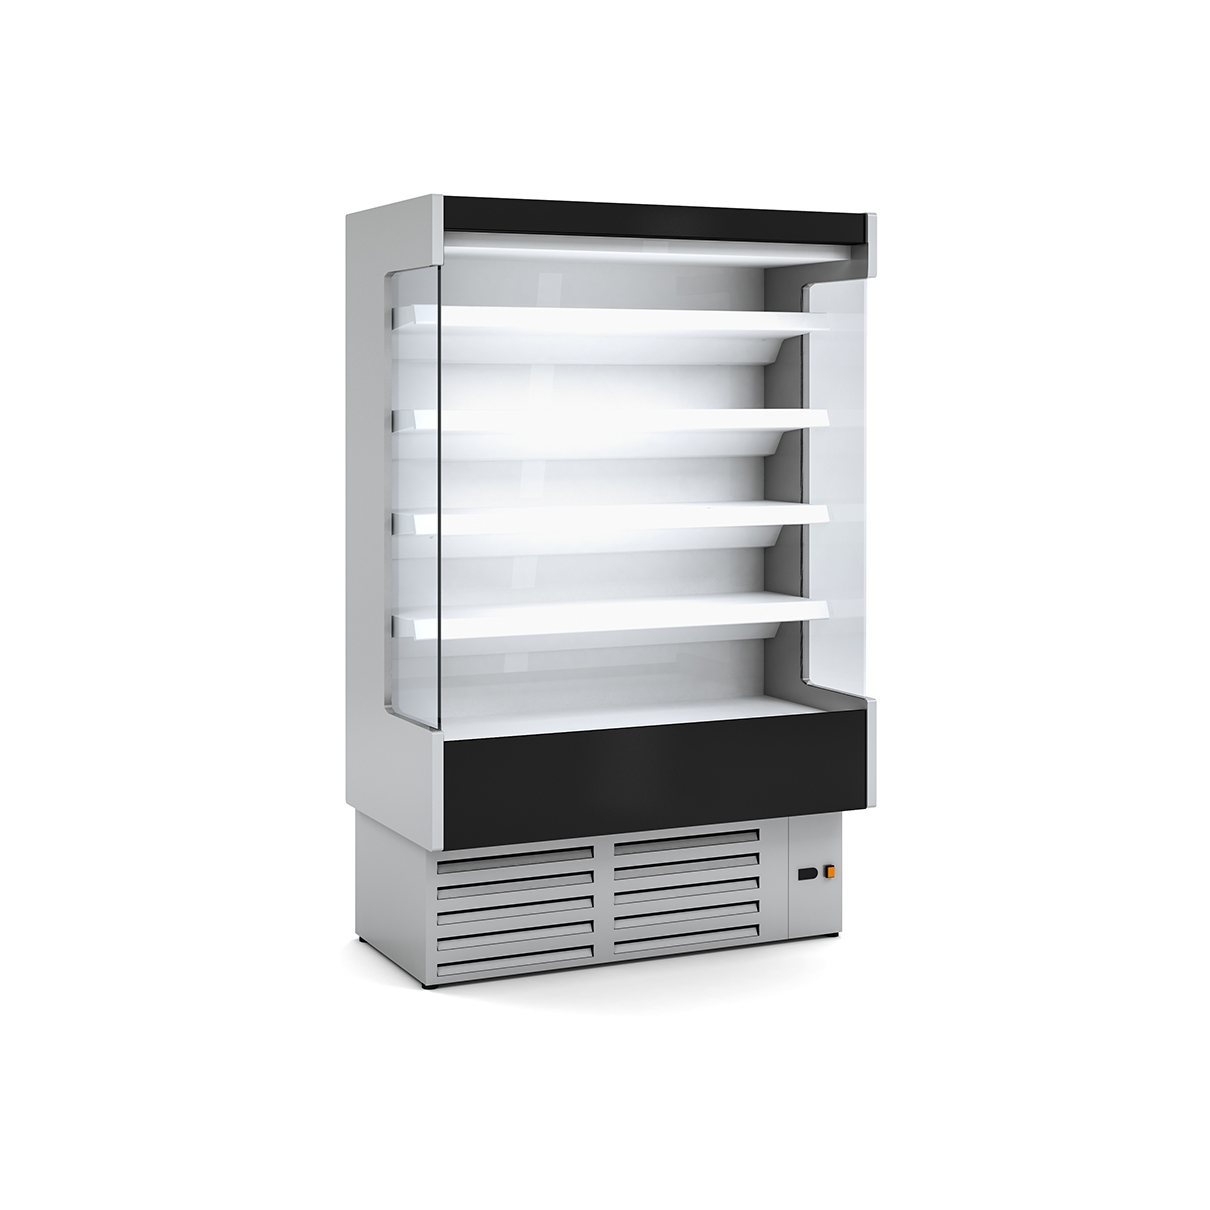 REFRIGERATED WALL-MOUNTED DISPLAY CABINET DS0 M1-M2